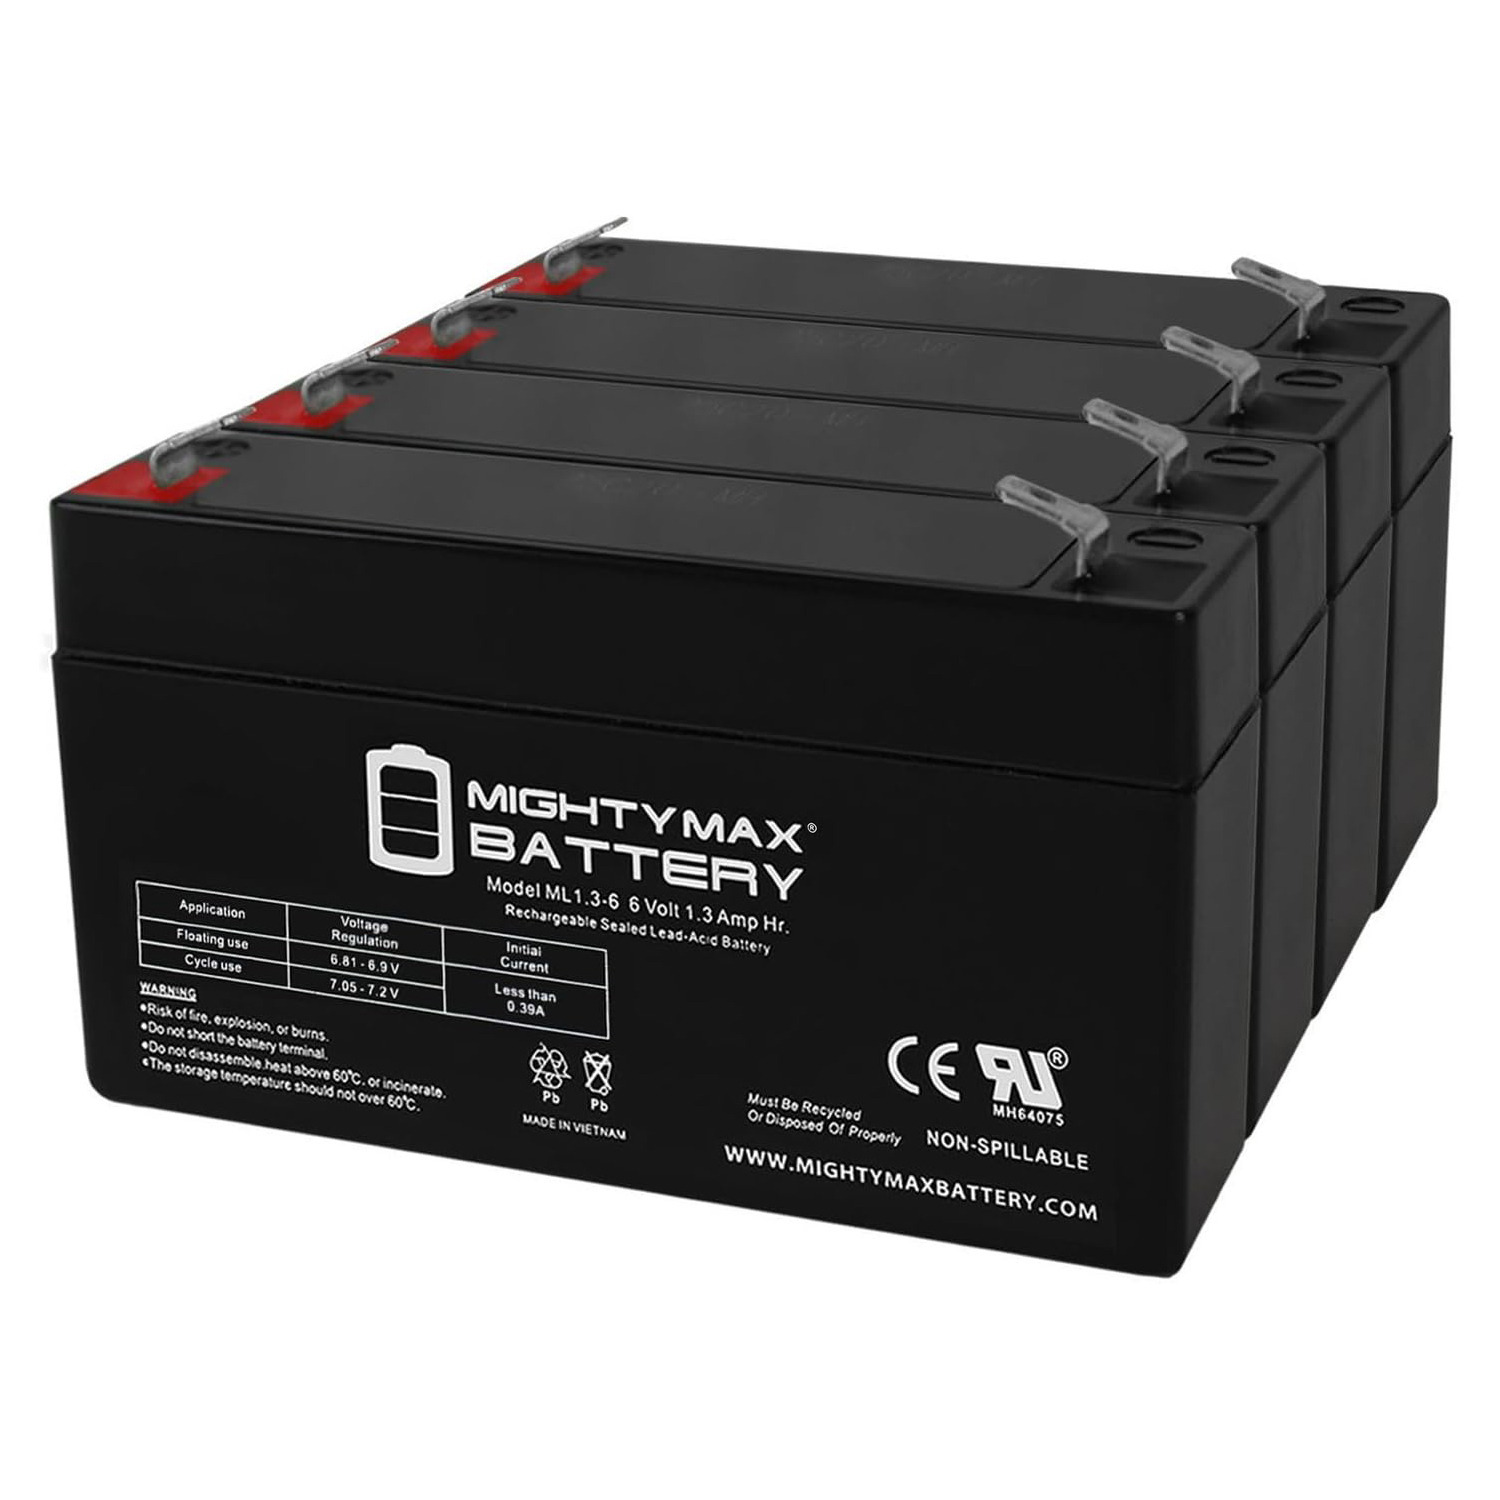 6V 1.3Ah Protocol Systems 240 Monitor Medical Battery - 4 Pack